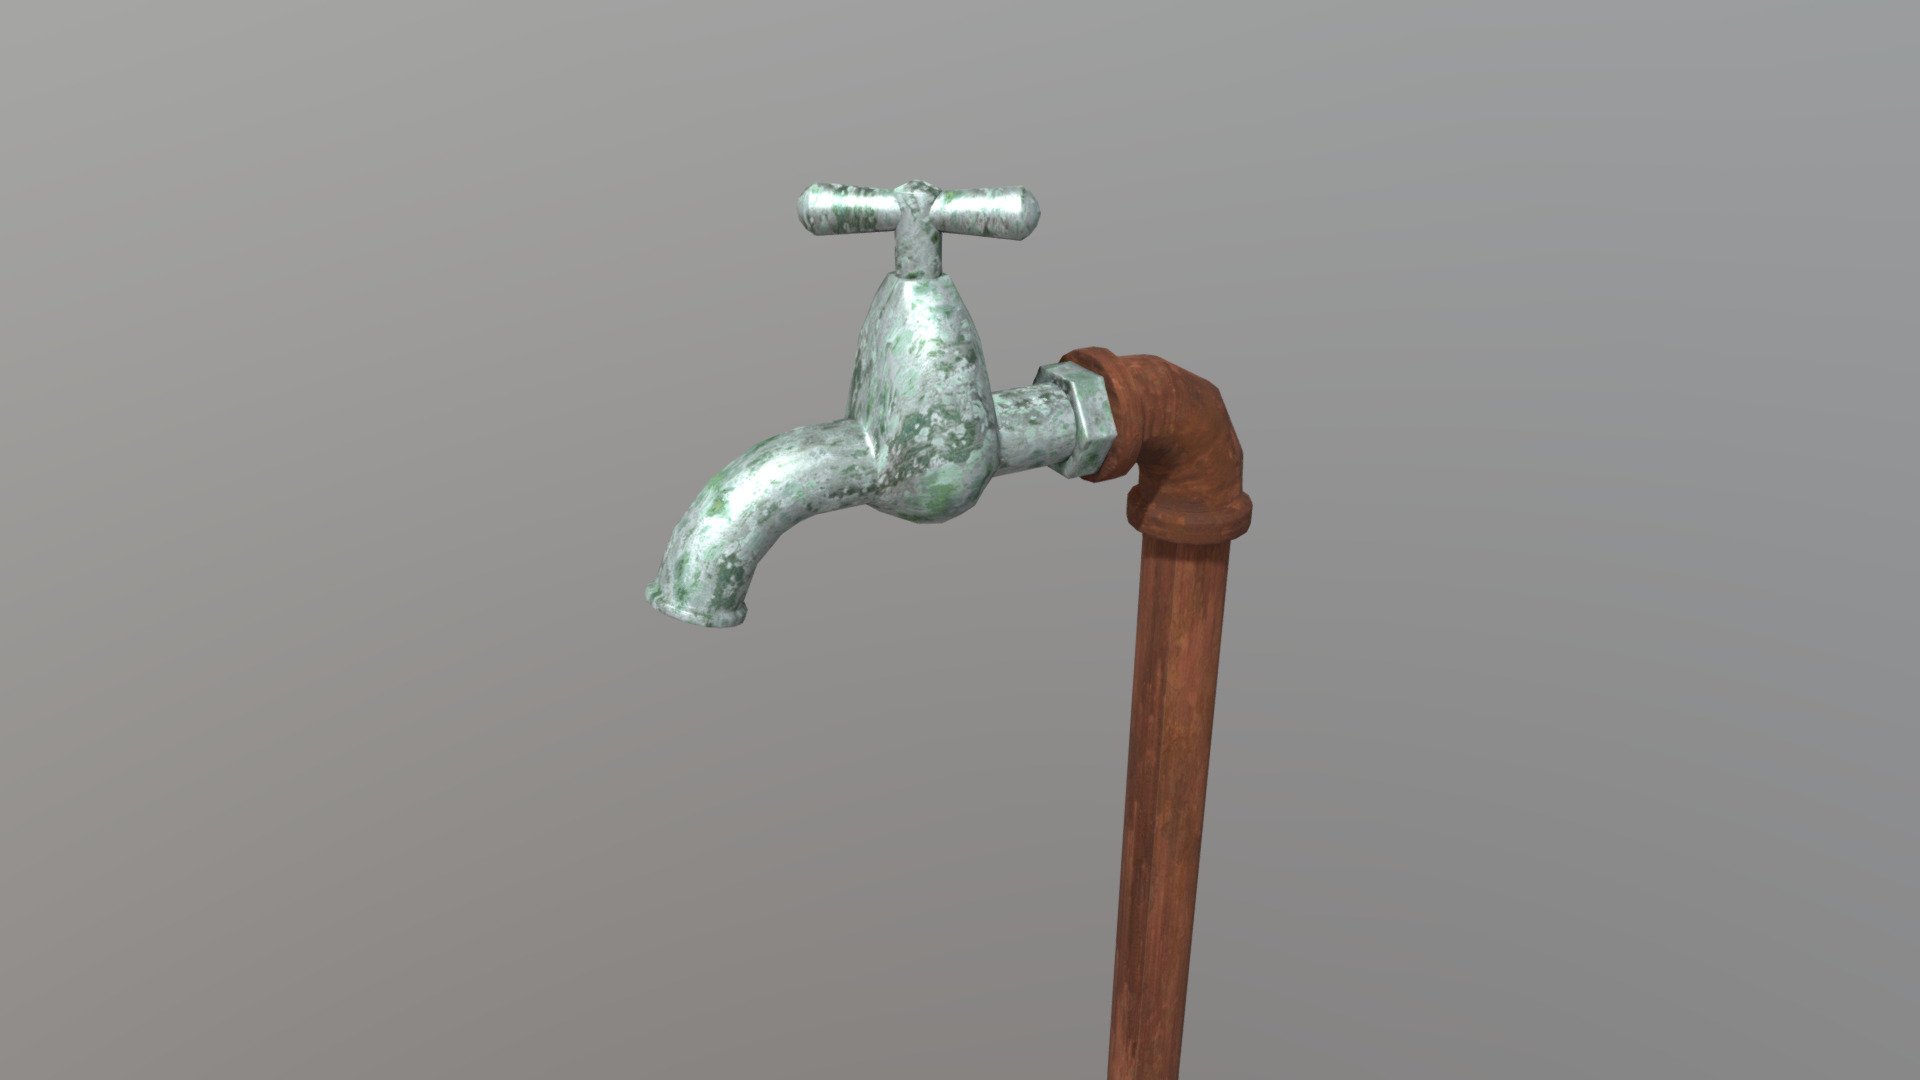 ‘The older the faucet the better the water.’

● 2048x2048 PBR textures

● normal map is baked from the high poly model.

If you need help with this model or have a question – please do not hesitate to contact me. I will be happy to help you 3d model